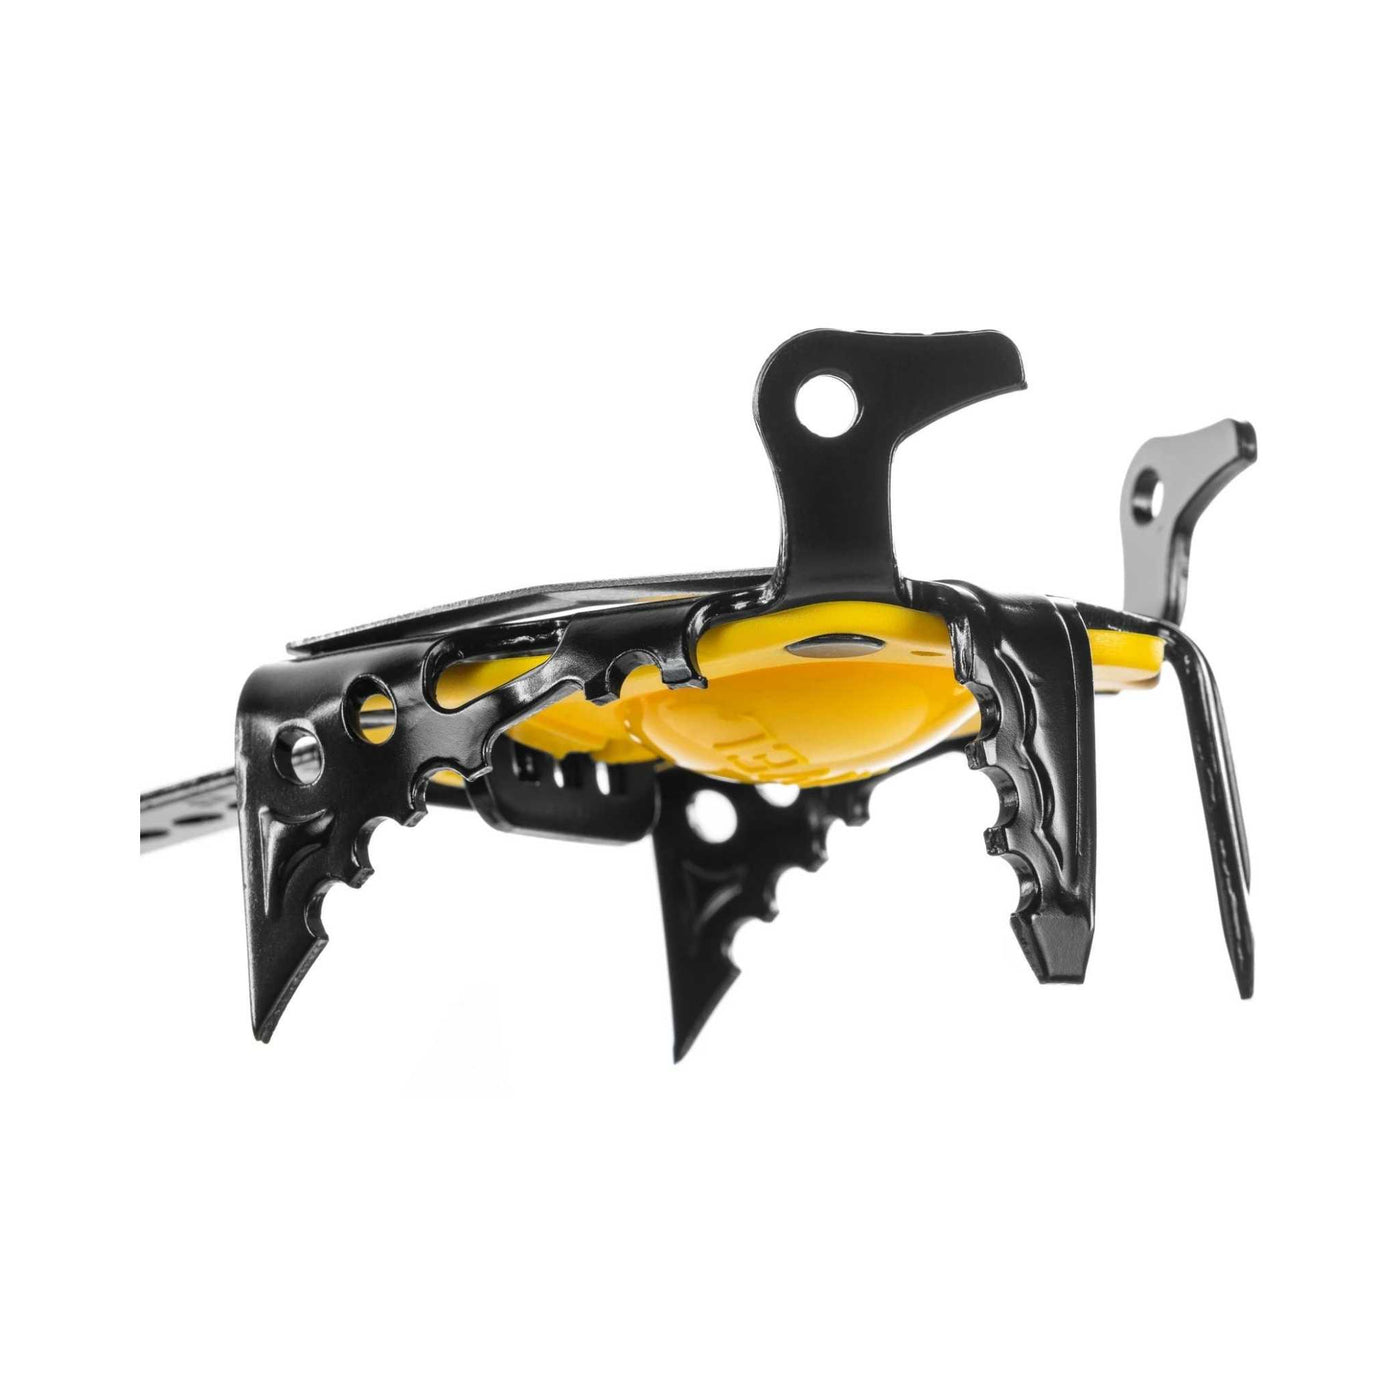 Grivel G12 Evo Crampon - New Classic | Mountaineering Crampons | Further Faster Christchurch NZ 